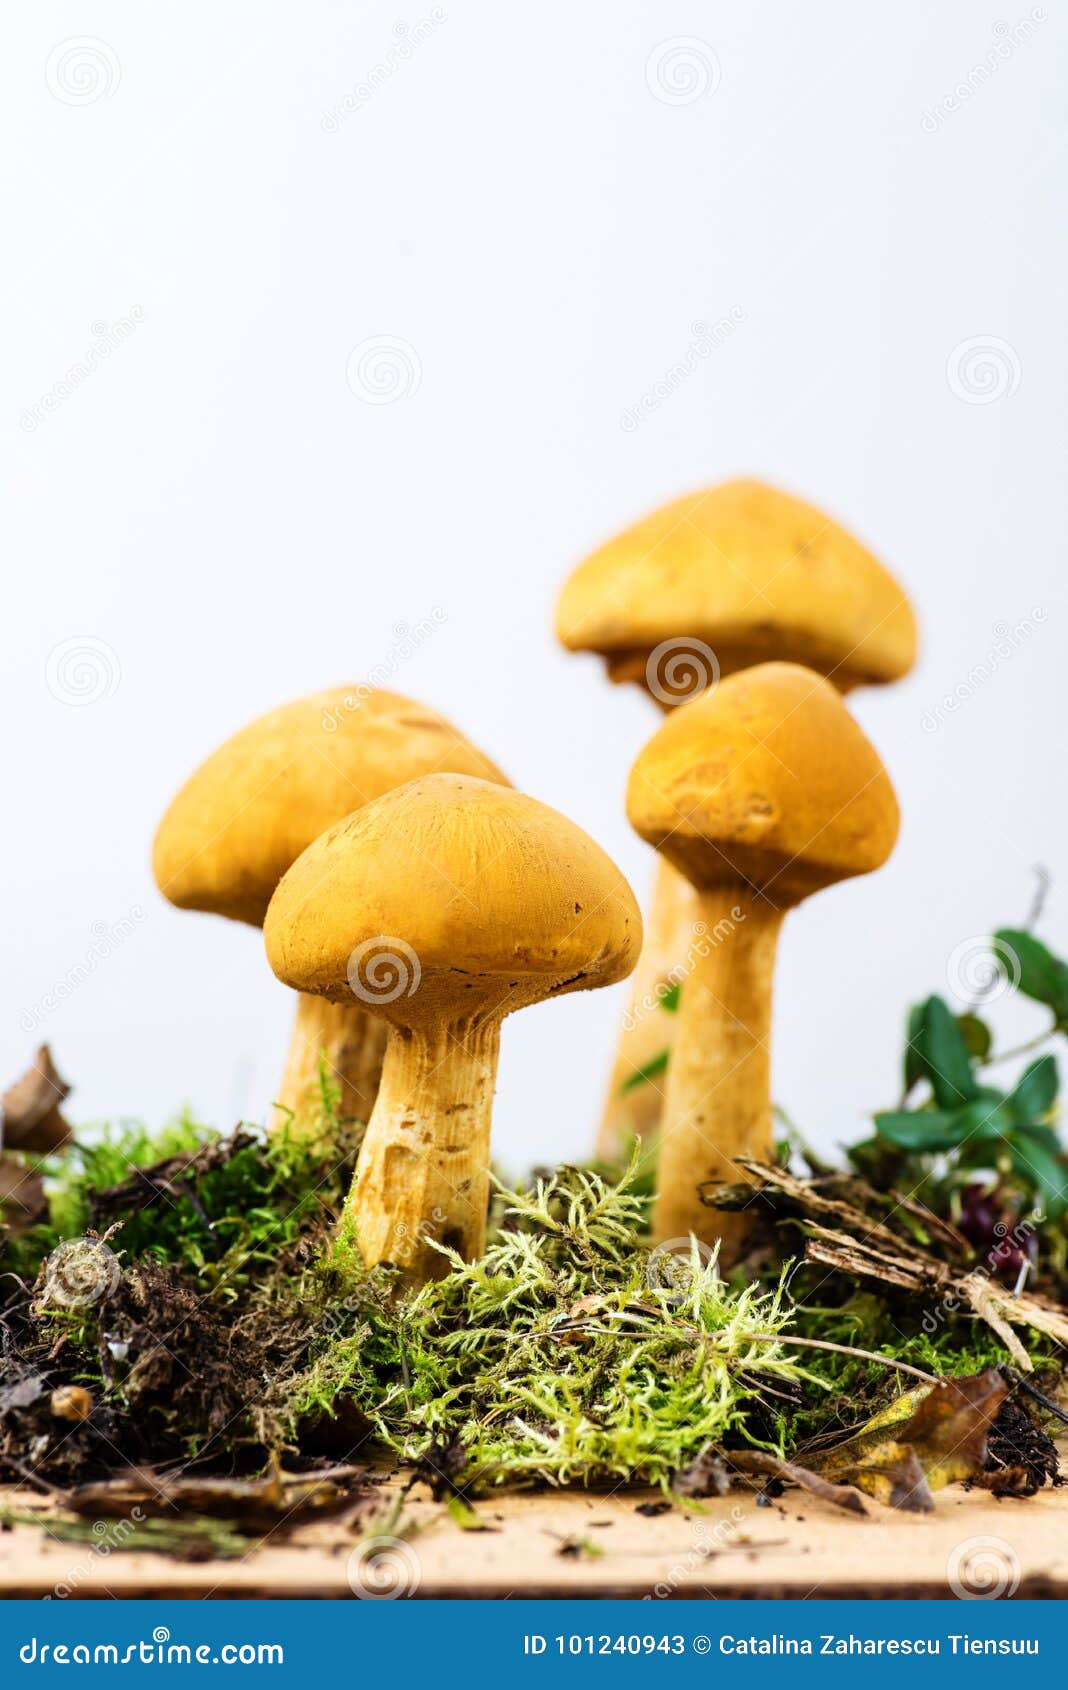 group of young golden bootleg mushrooms